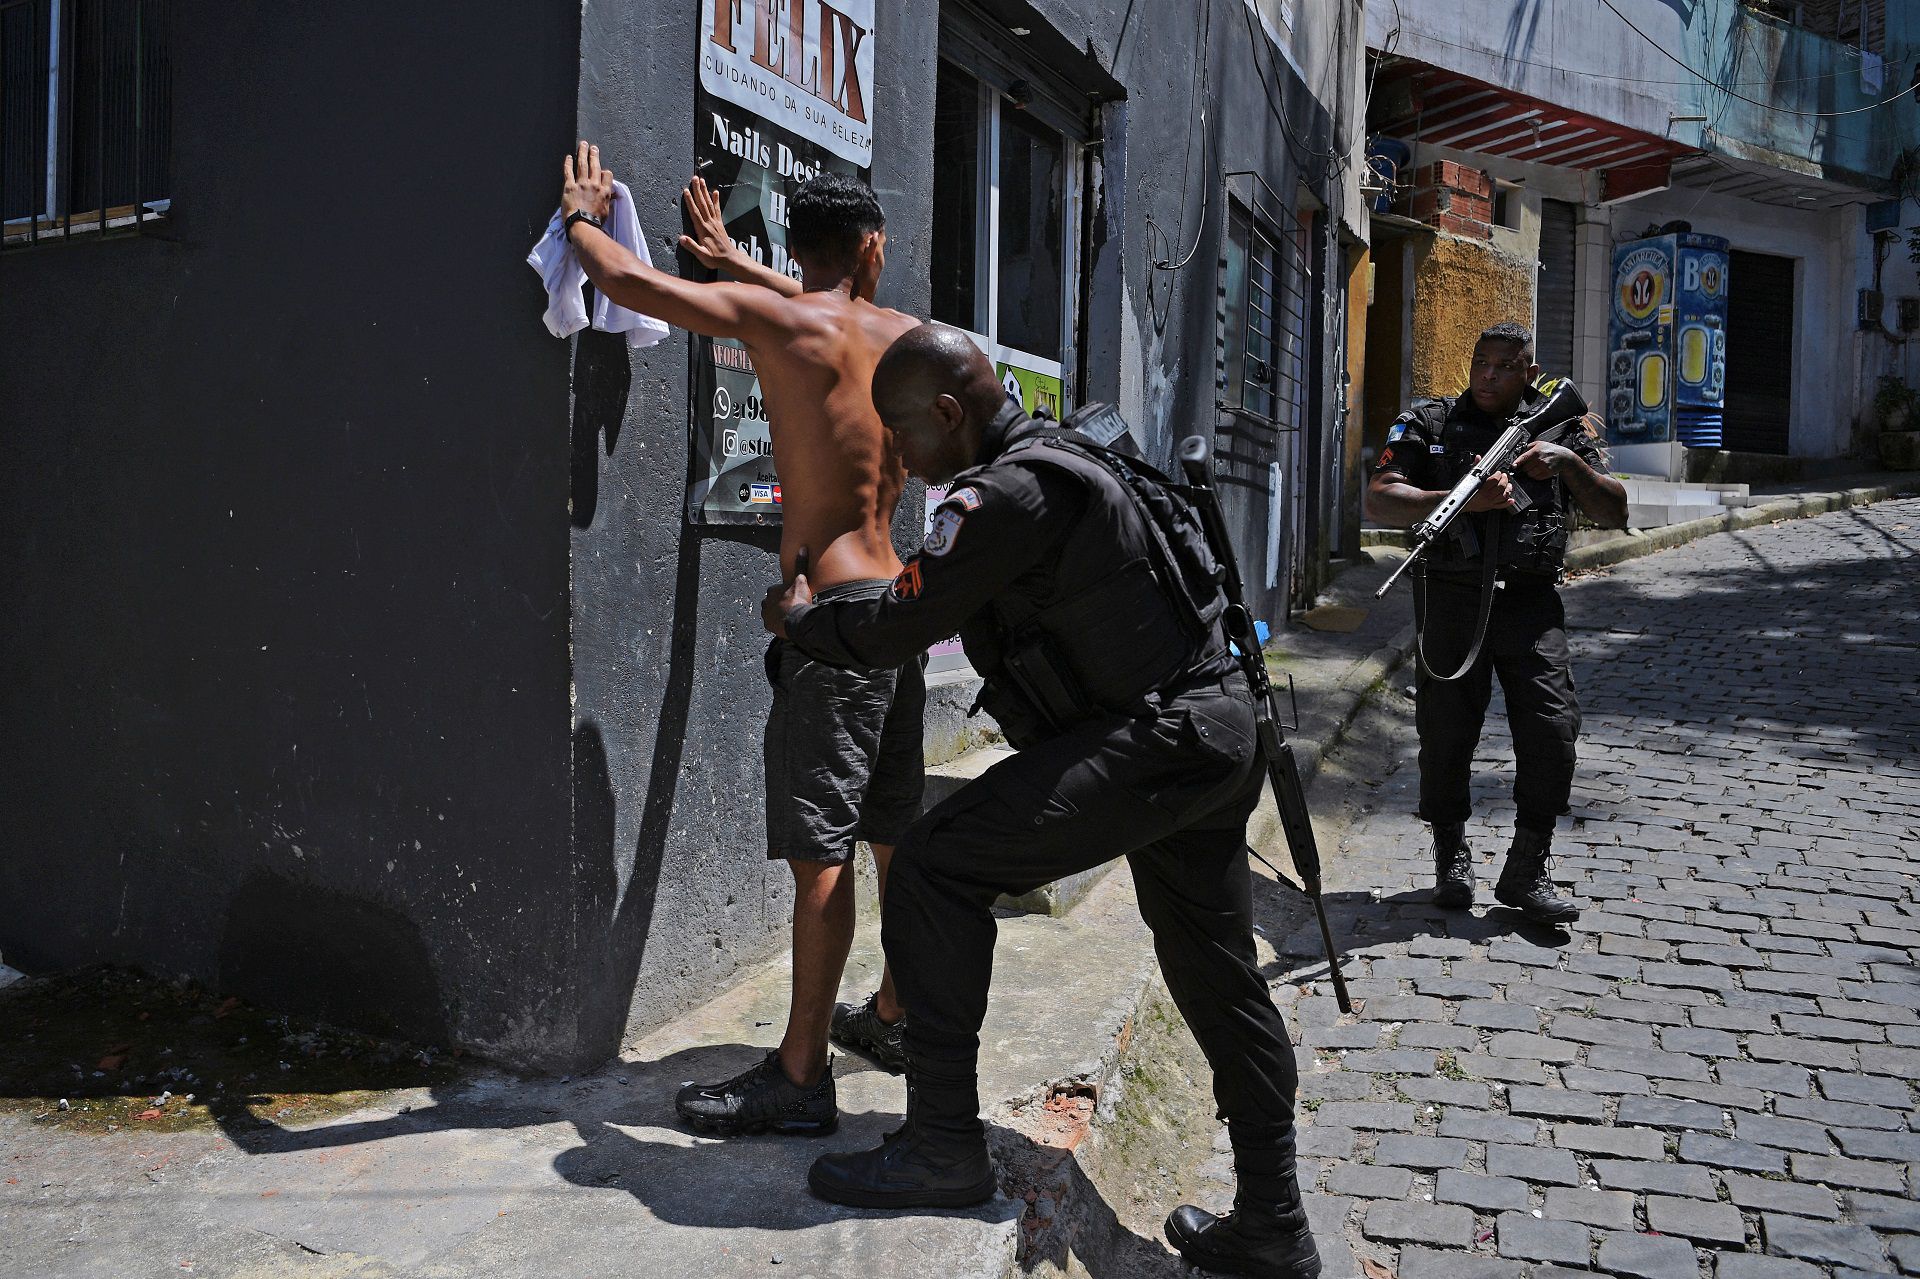 (FILES) In this file photo taken on January 20, 2022, a member of the Brazilian Military Police frisks a suspect during a large scale operation against drug trafficking and militias, to occupy and secure parts of the Morro do Banco favela in Rio de Janeiro, Brazil. - The governor of Rio de Janiero Claudio Castro announced on Saturday, January 22, a security and social development program for the favelas. (Photo by CARL DE SOUZA / AFP)